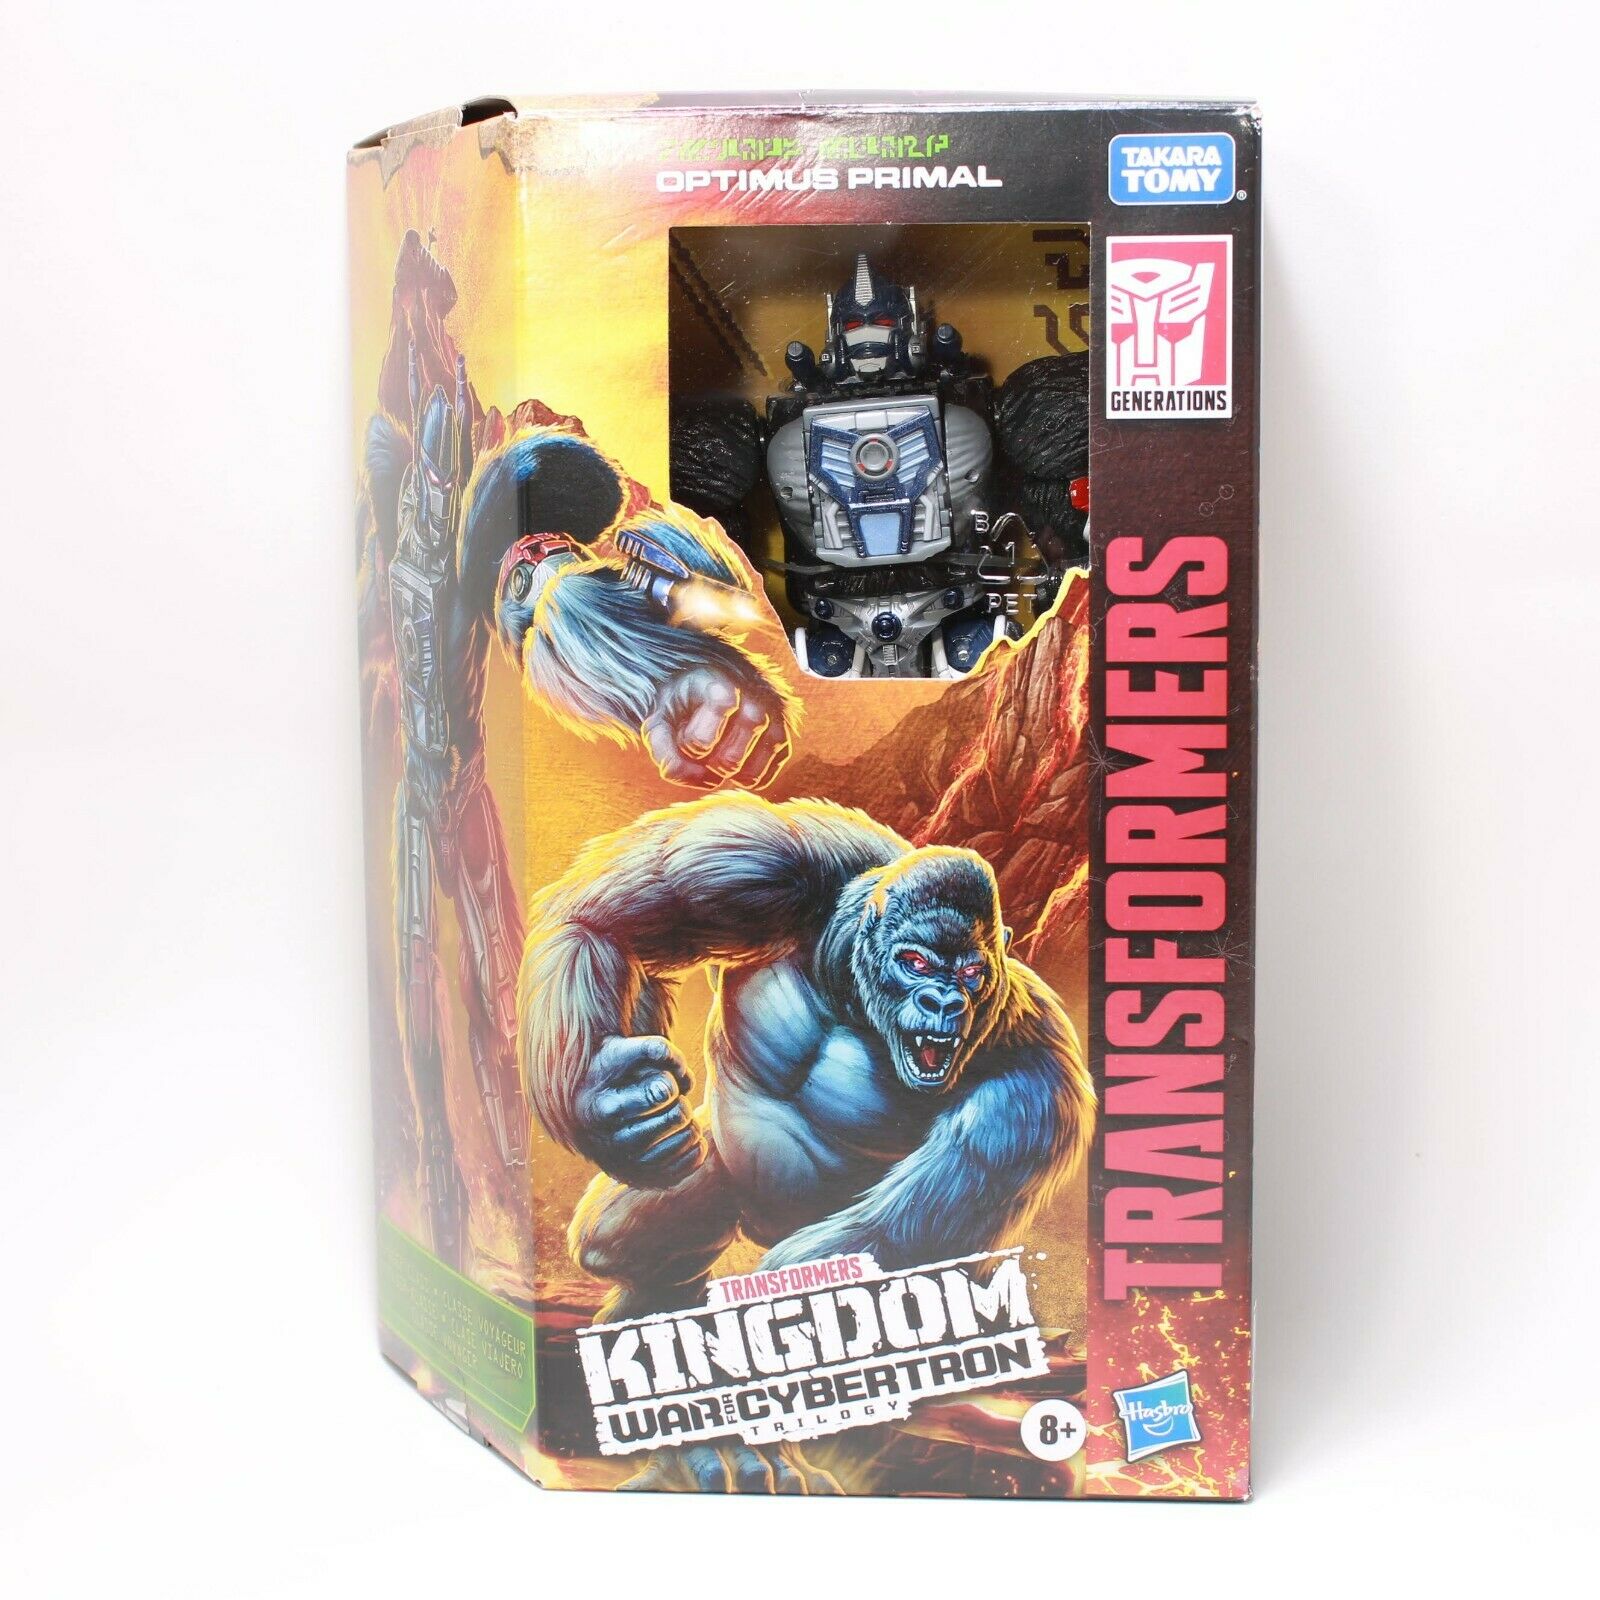 Transformers Kingdom Optimus Primal - Voyager Class War for Cybertron Complete